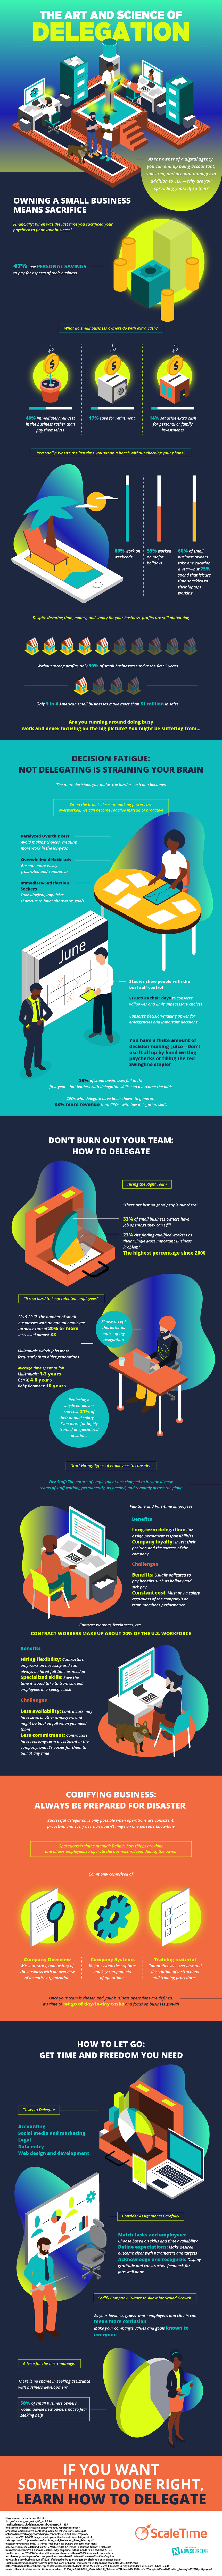 Infographic: The Art & Science of Delegation